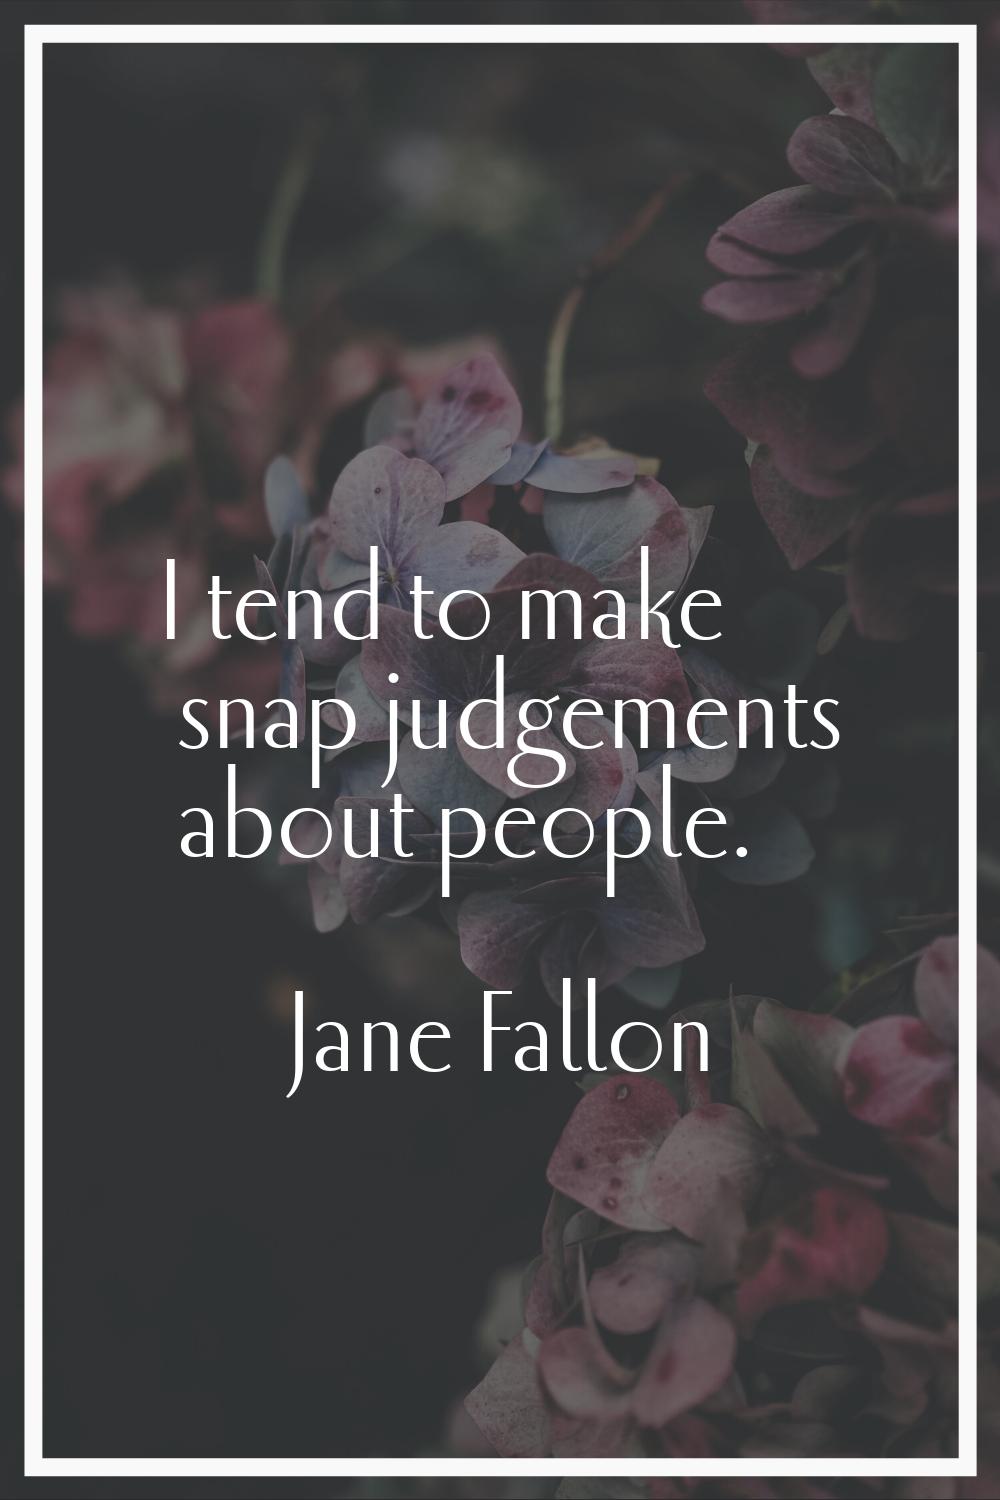 I tend to make snap judgements about people.